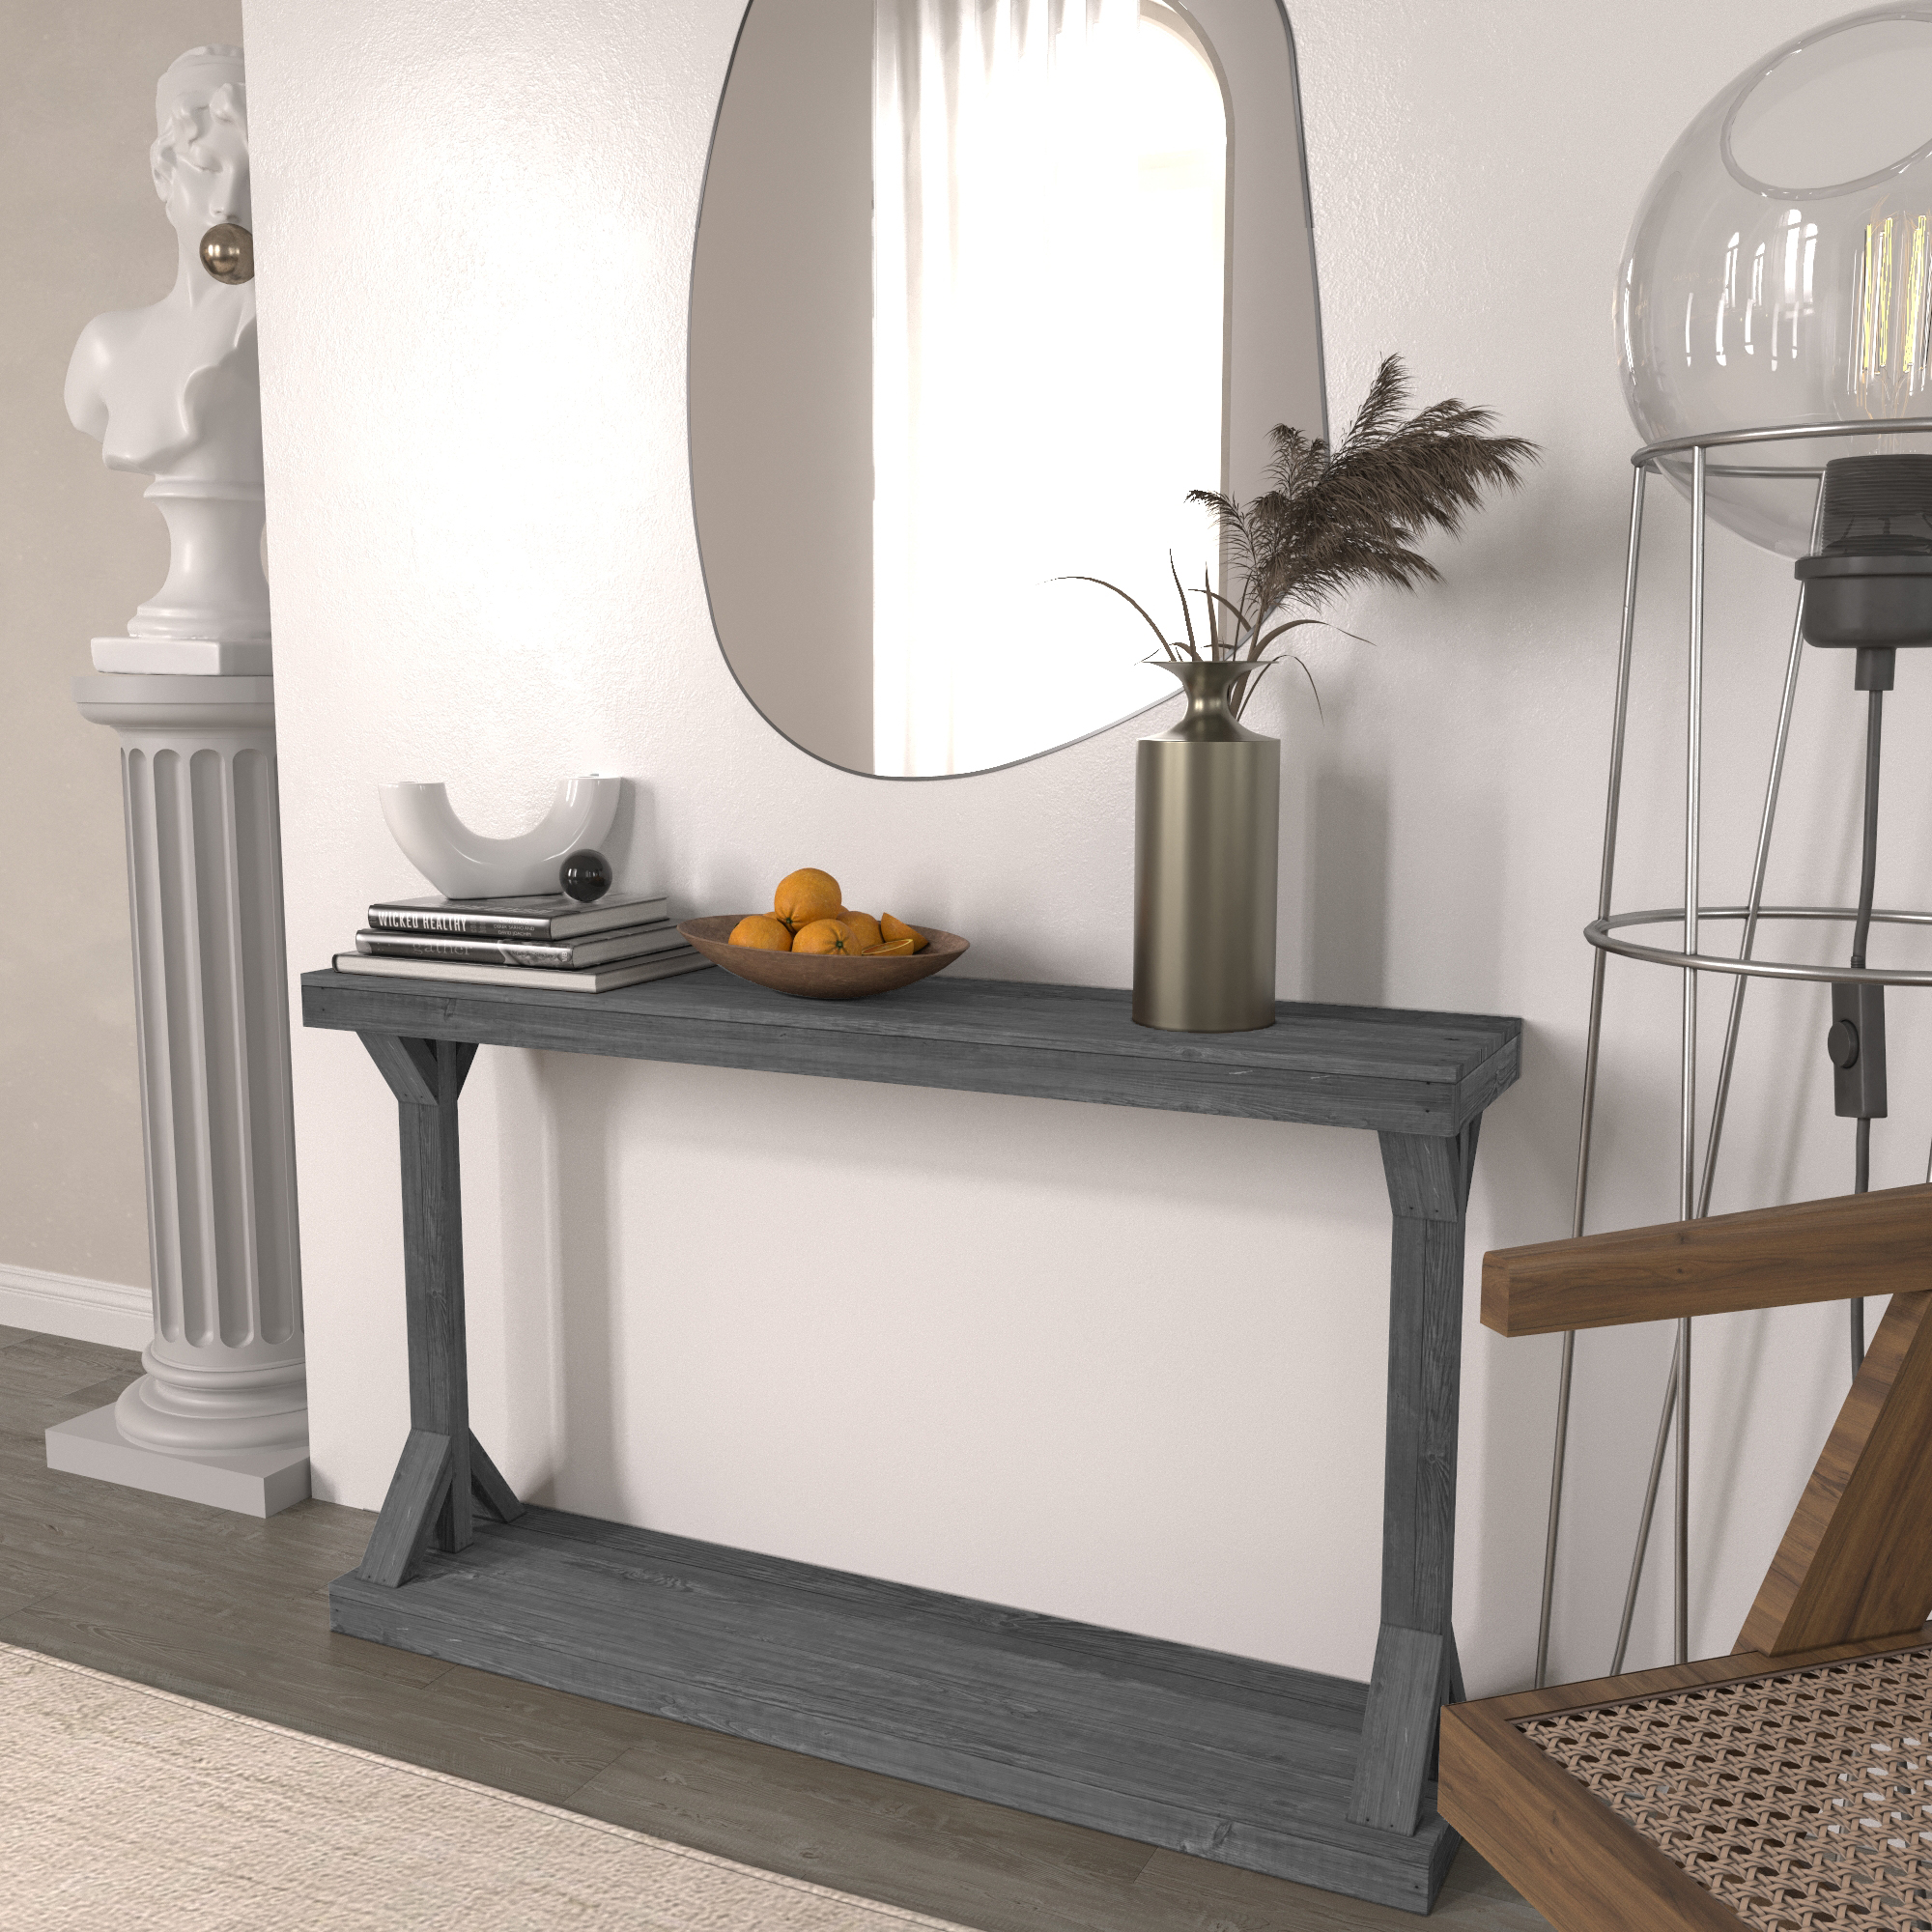 Woven Paths Large Rustic Barb Pedestal Entryway Console Table, Gray - image 2 of 4